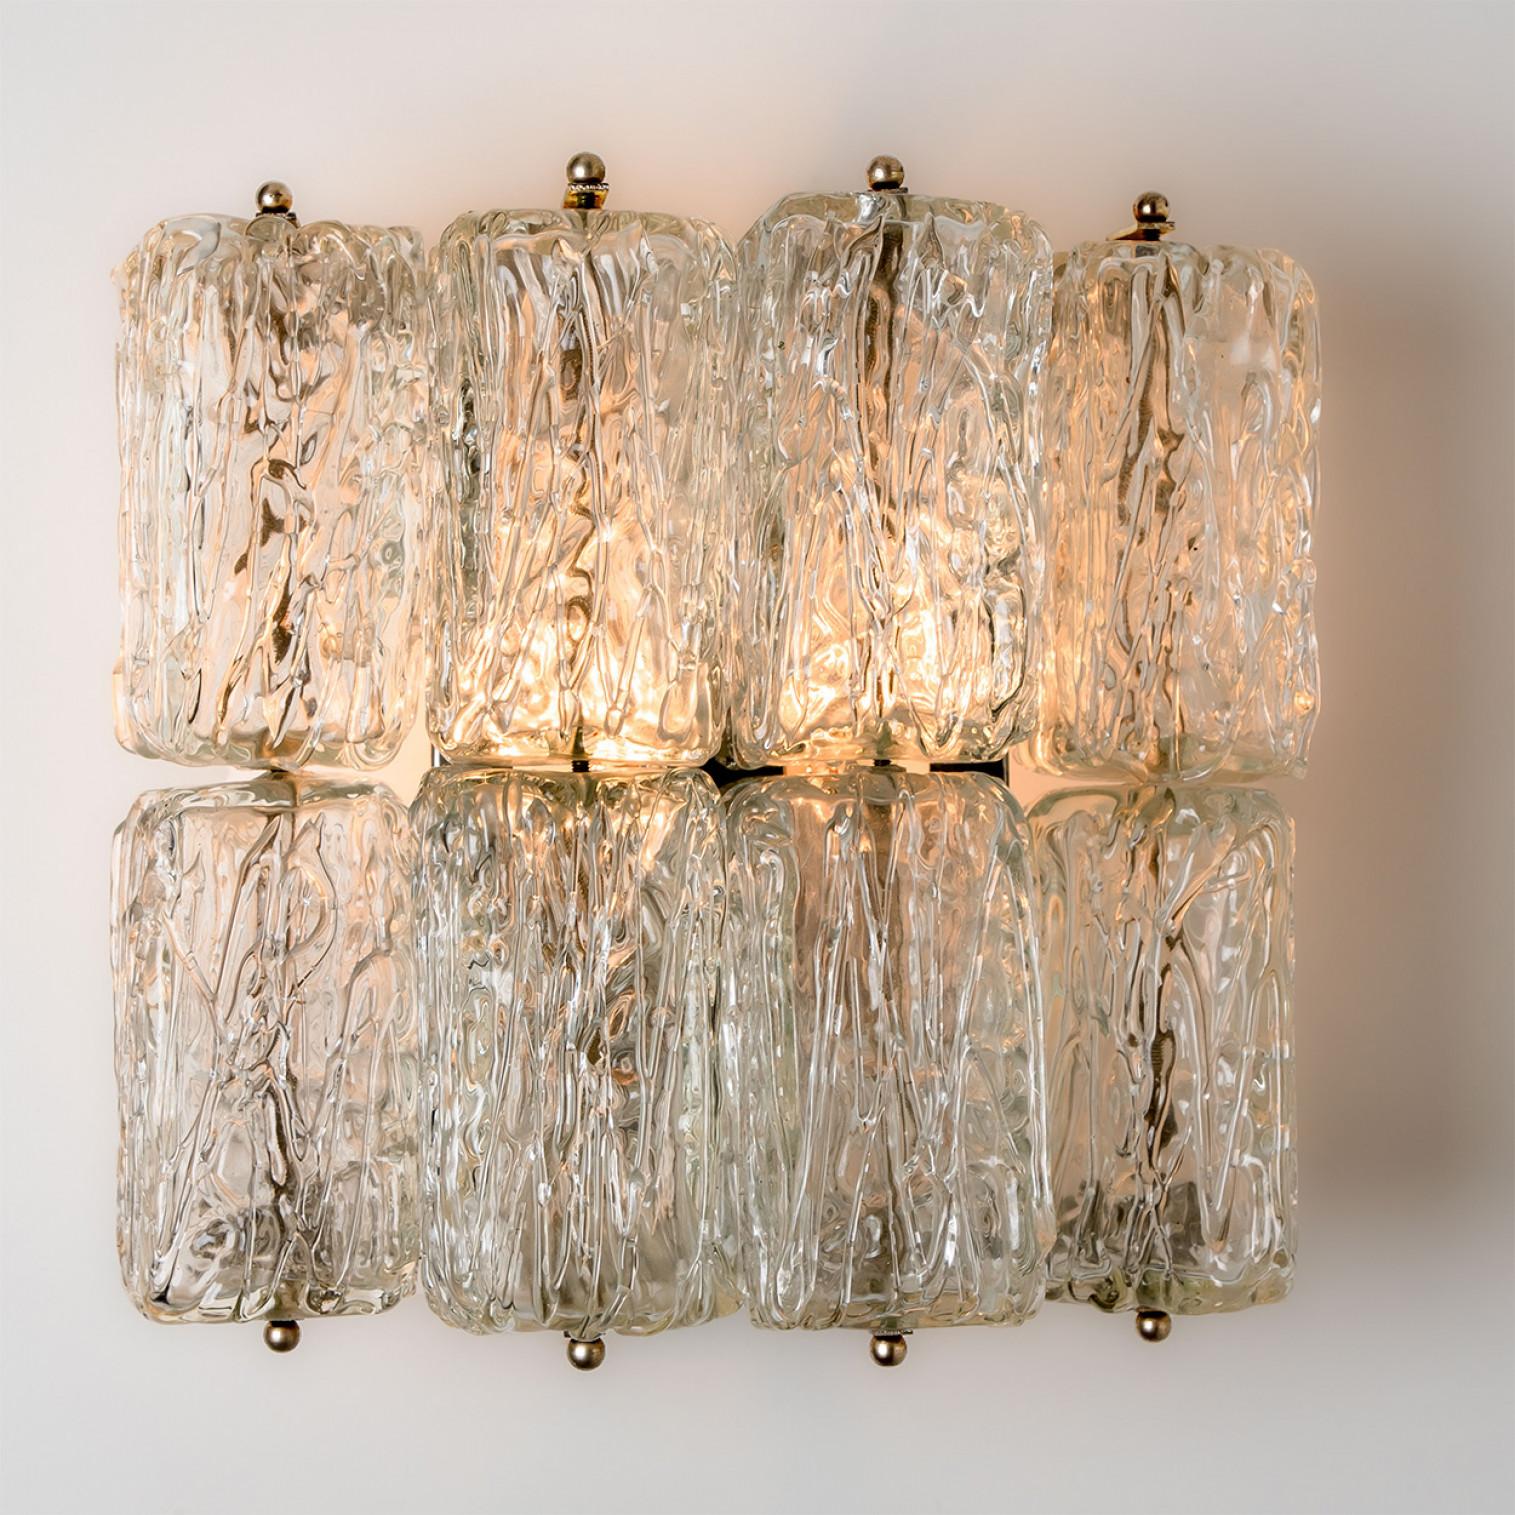 Beautiful high quality light fixture made by Kalmar, Austria. Manufactured in mid century, circa 1970 (at the end of 1960s and beginning of 1970s).

This wall light features lights made of handmade textured glass and white back plate. The sides